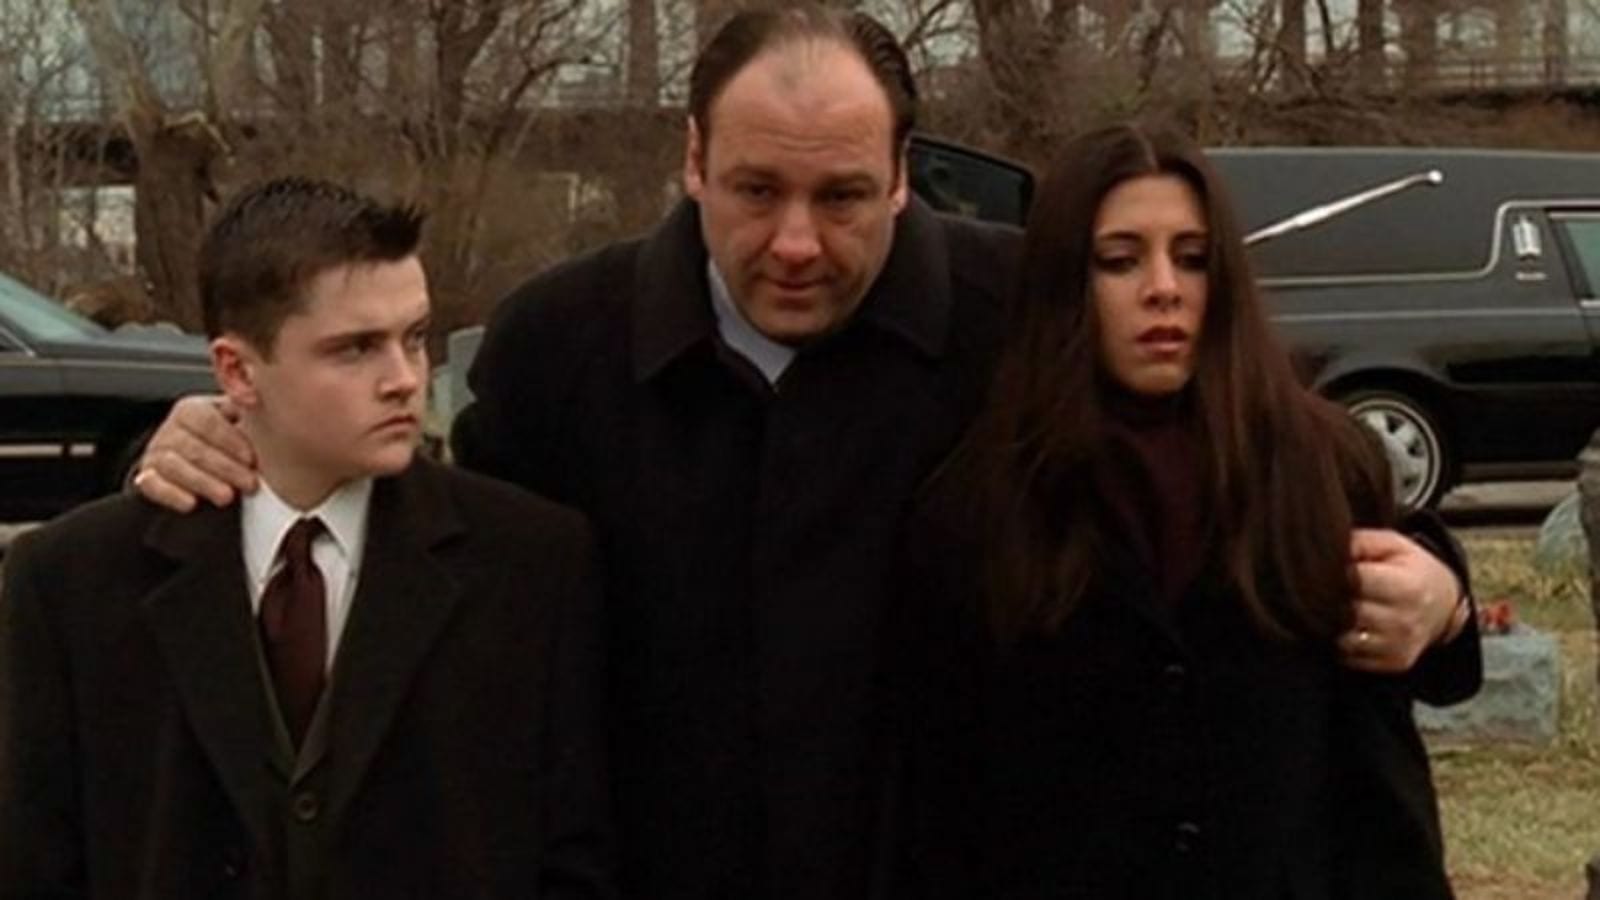 Tony escorts A.J. and Meadow to a funeral